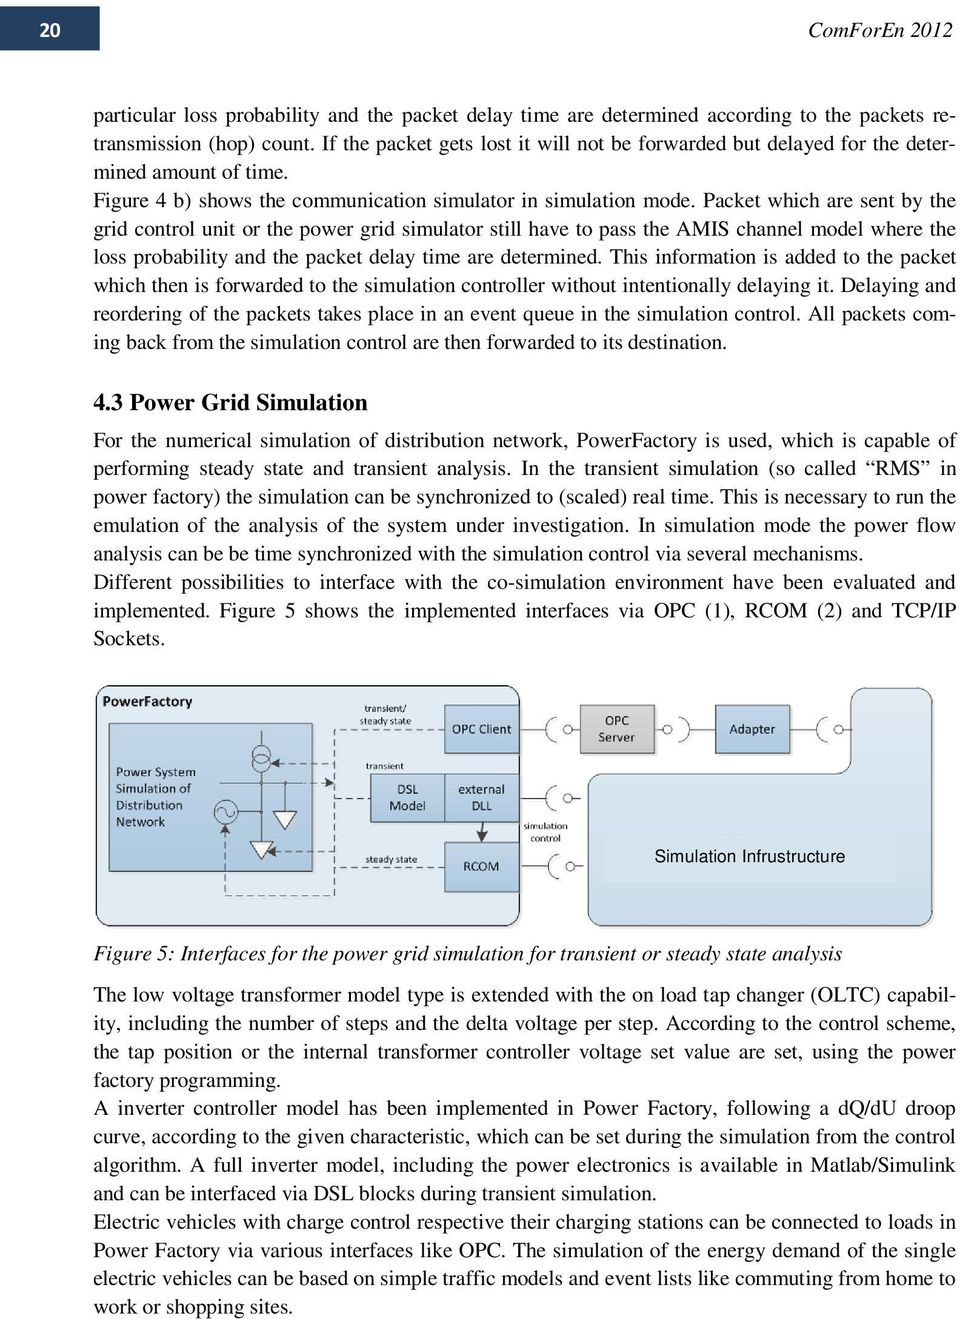 Packet which are sent by the grid control unit or the power grid simulator still have to pass the AMIS channel model where the loss probability and the packet delay time are determined.